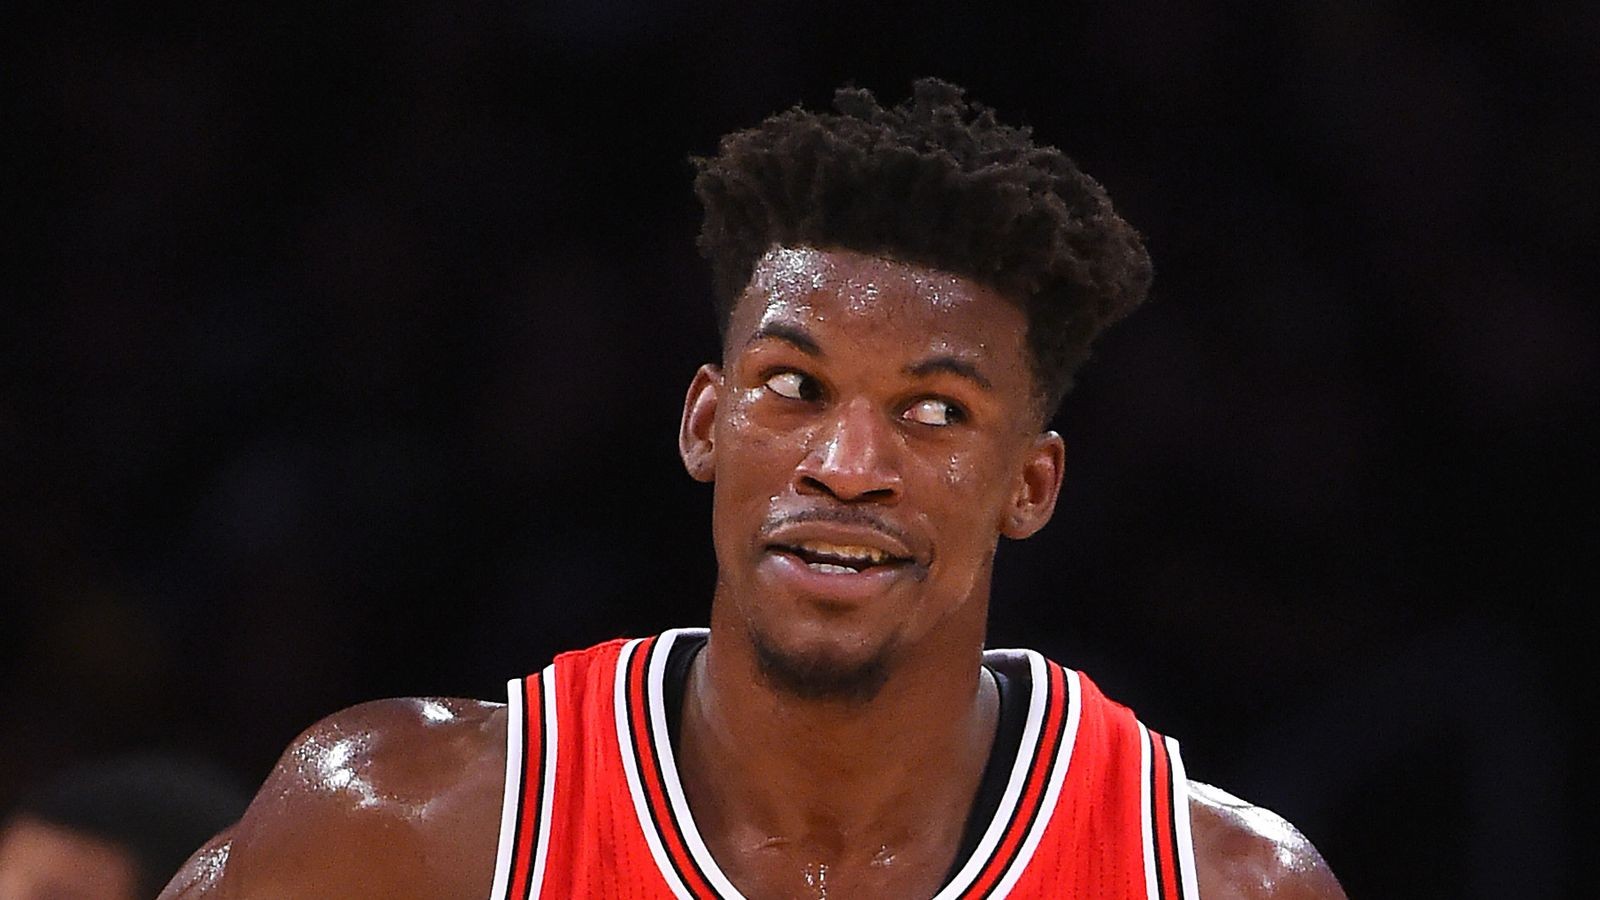 Jimmy Butler said he was going to get 40 points, then did so against the La...